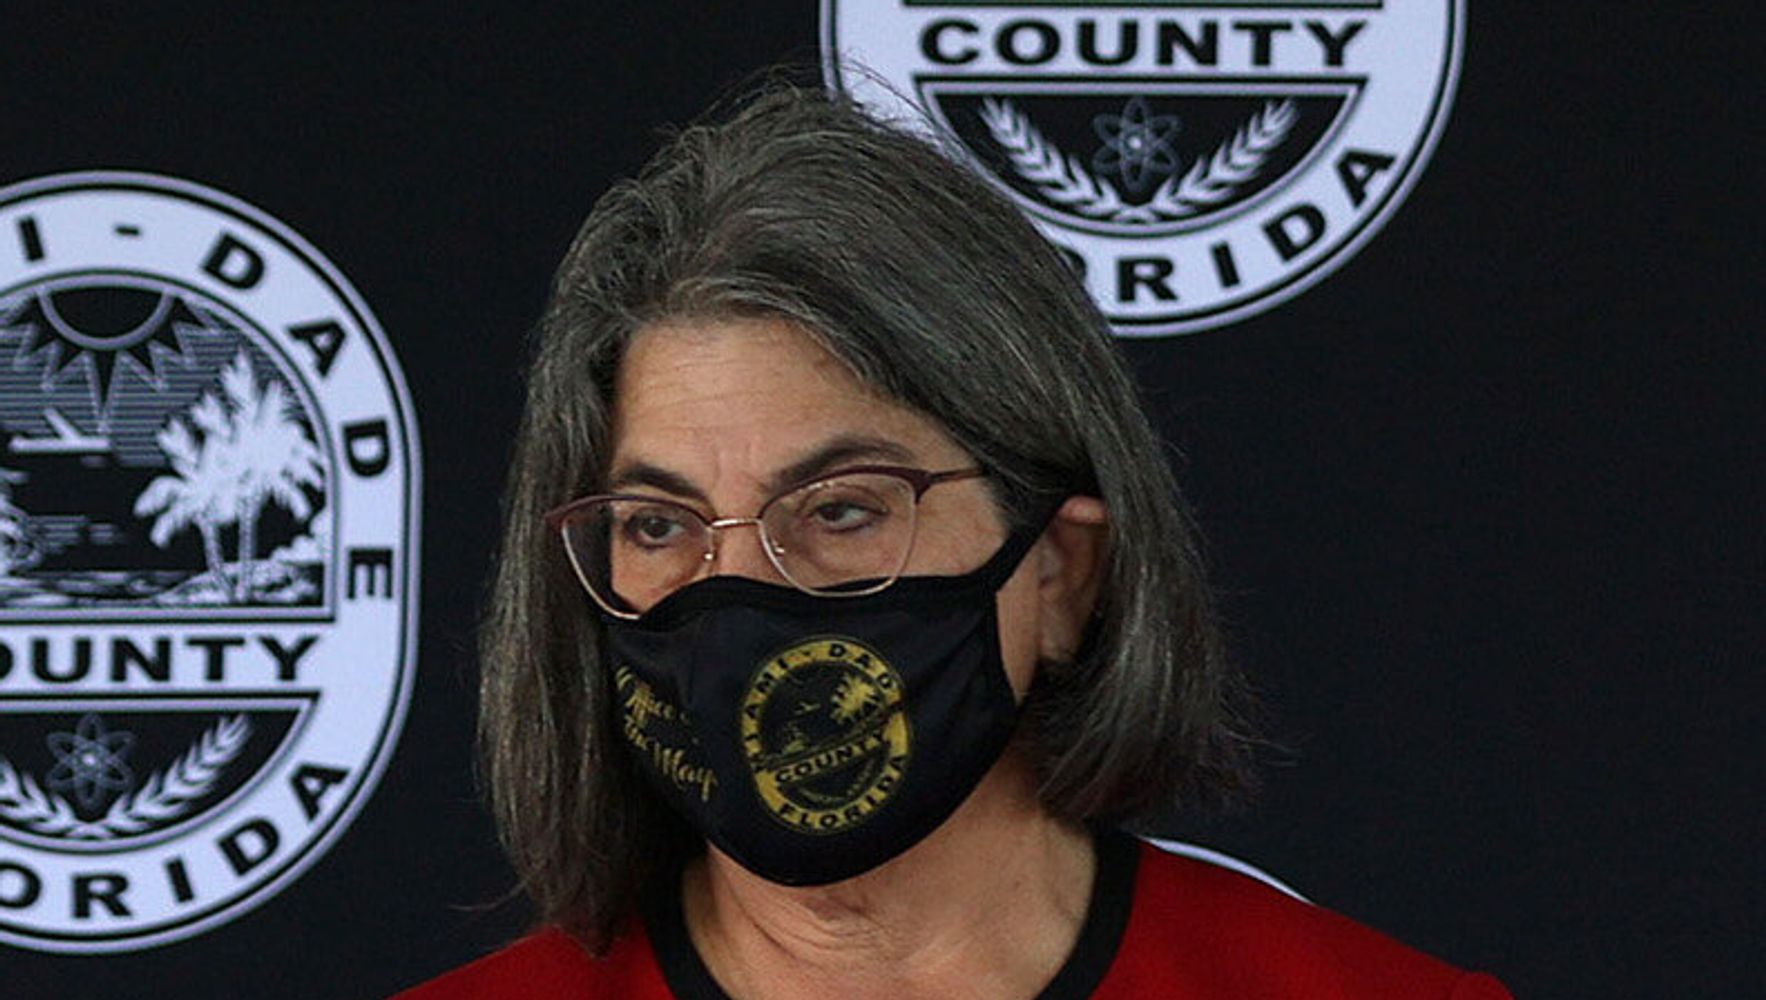 Miami-Dade County Latest To Re-Up Mask Requirements Amid Delta Variant Surge